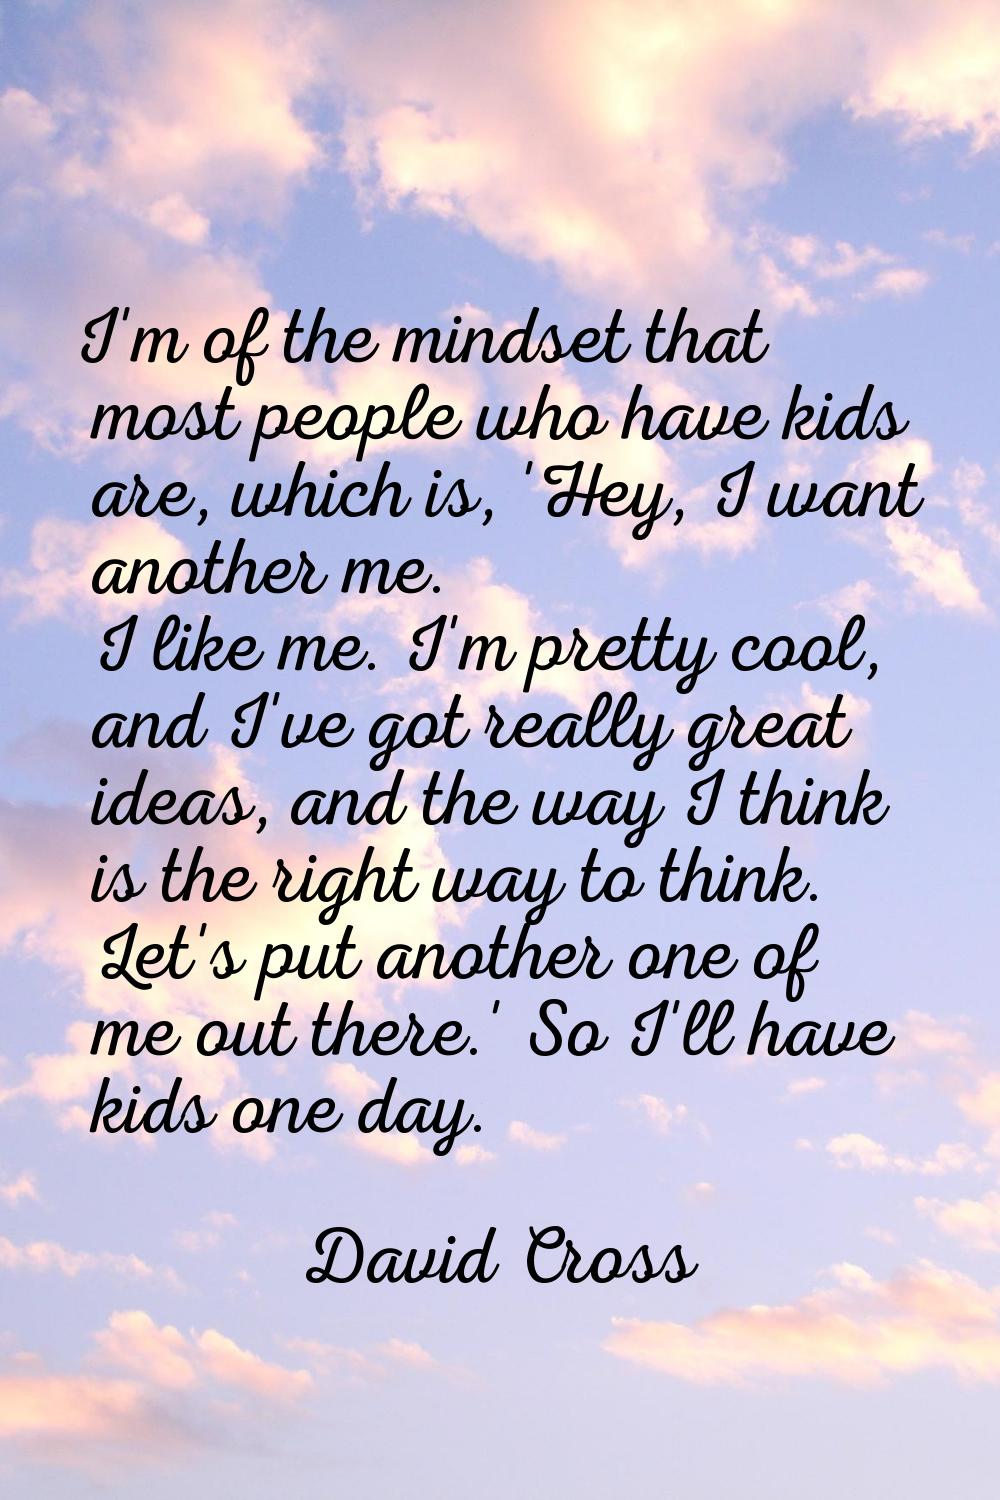 I'm of the mindset that most people who have kids are, which is, 'Hey, I want another me. I like me